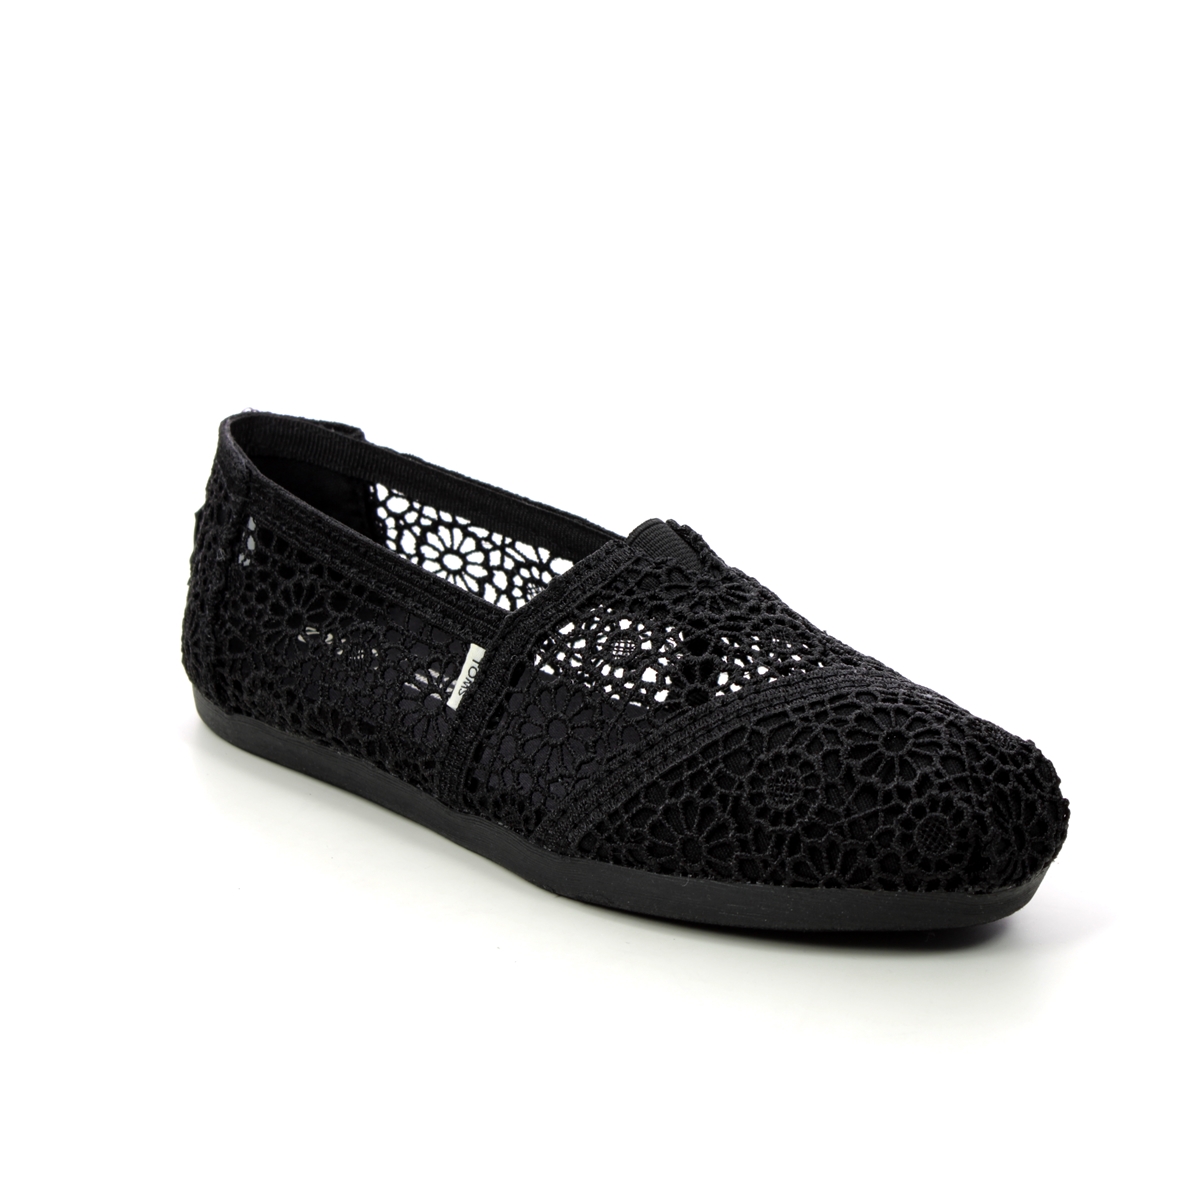 Toms Moroccan Crochet Black Womens Espadrilles 10016254- in a Plain Textile in Size 4